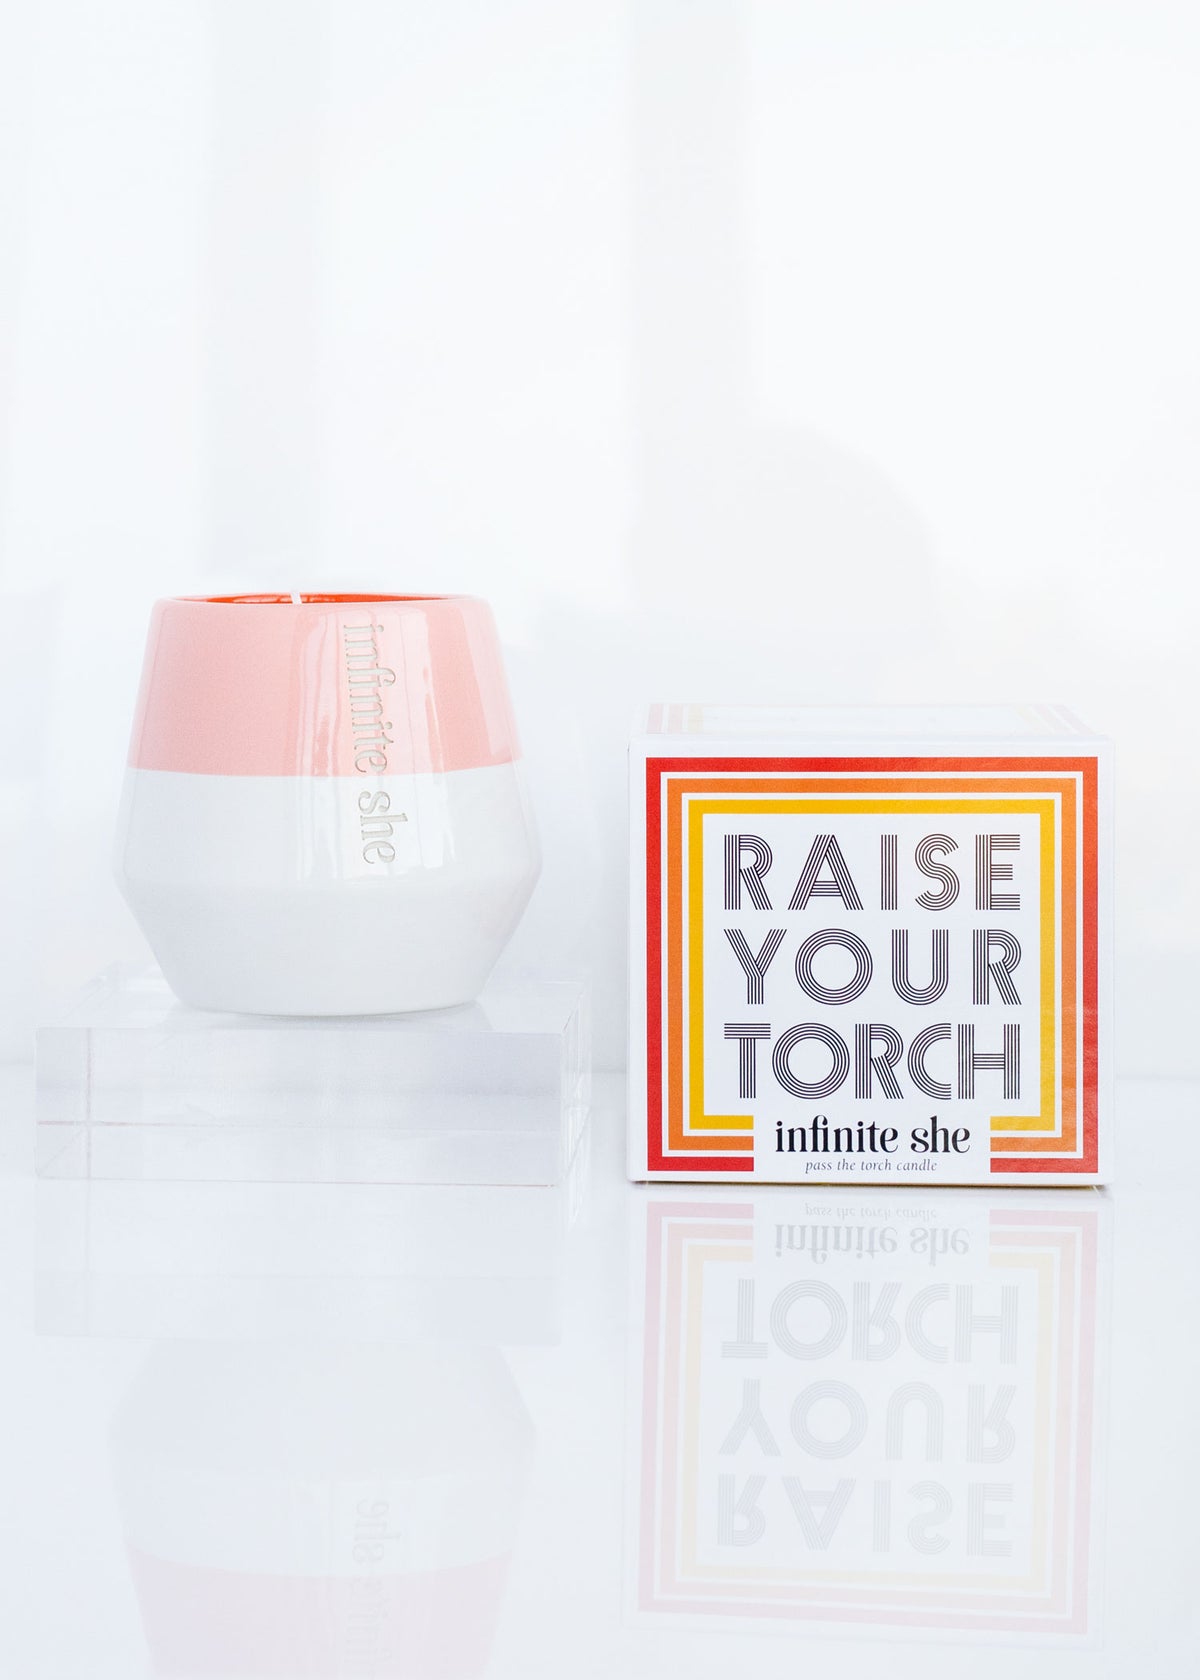 A white and peach-colored sandalwood-scented candle labeled "Infinite She Raise Your Torch Ceramic Candle" next to a cardboard box with the words "raise your torch" on a reflective white surface.